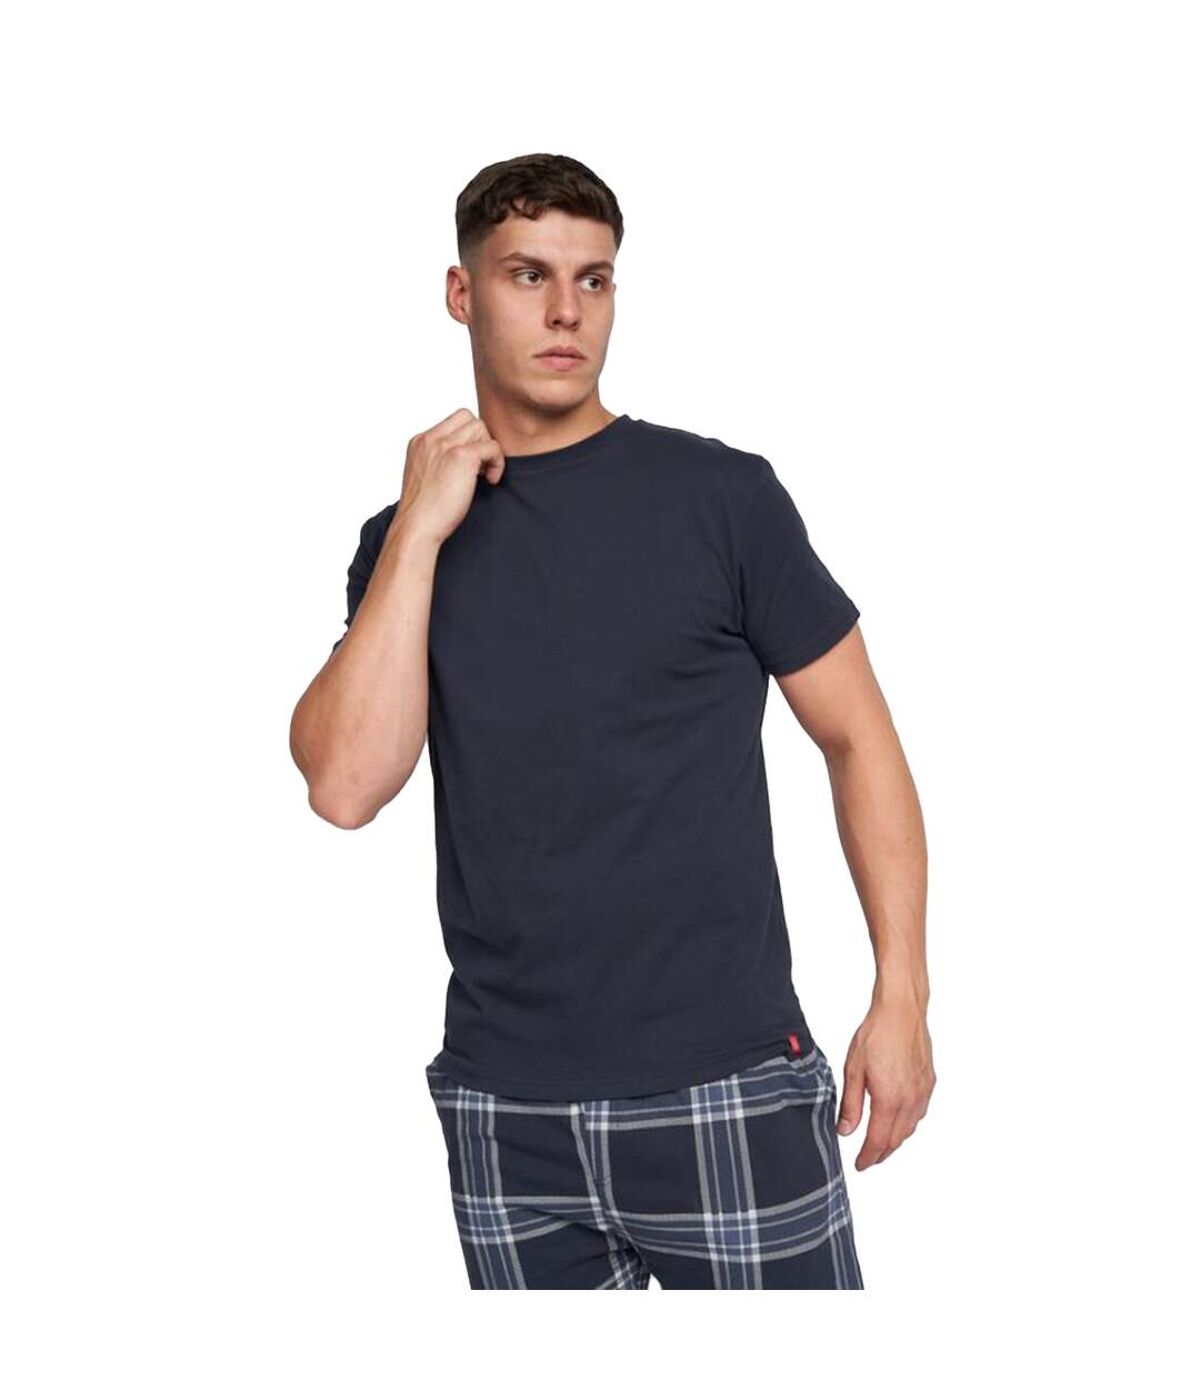 Duck and Cover Mens Callister Pajama Set (Navy)